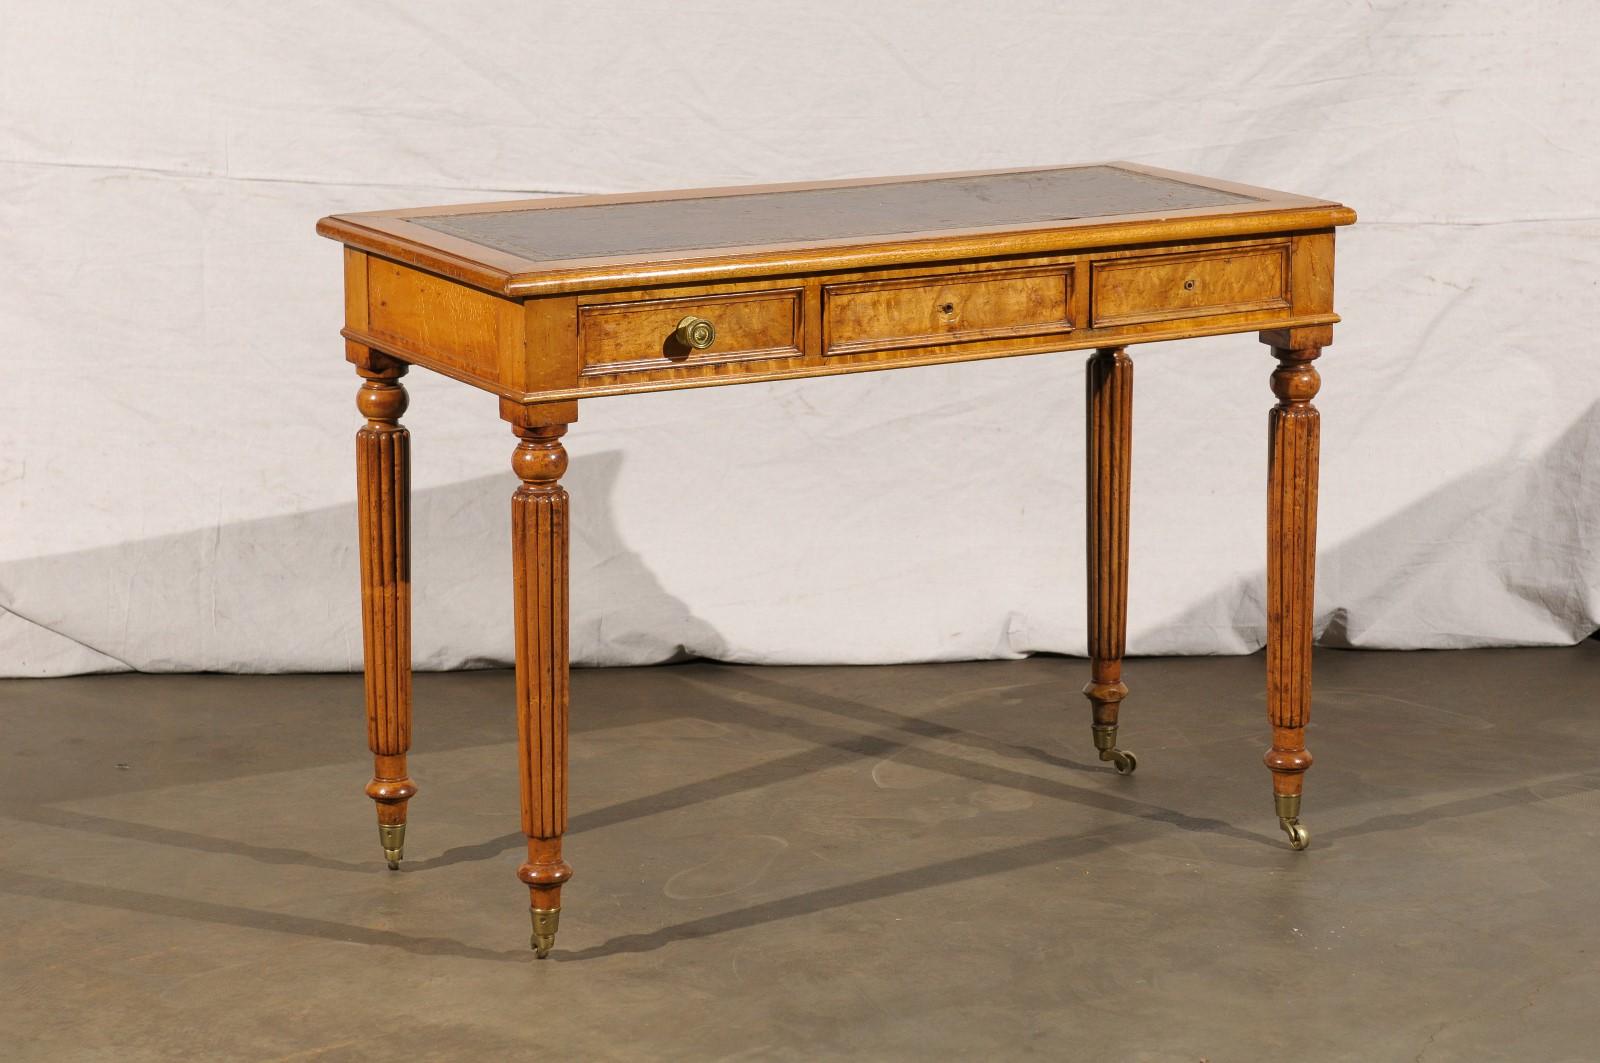 English William IV Bird's-Eye Maple Writing Table Desk with Leather Top, circa 1840s